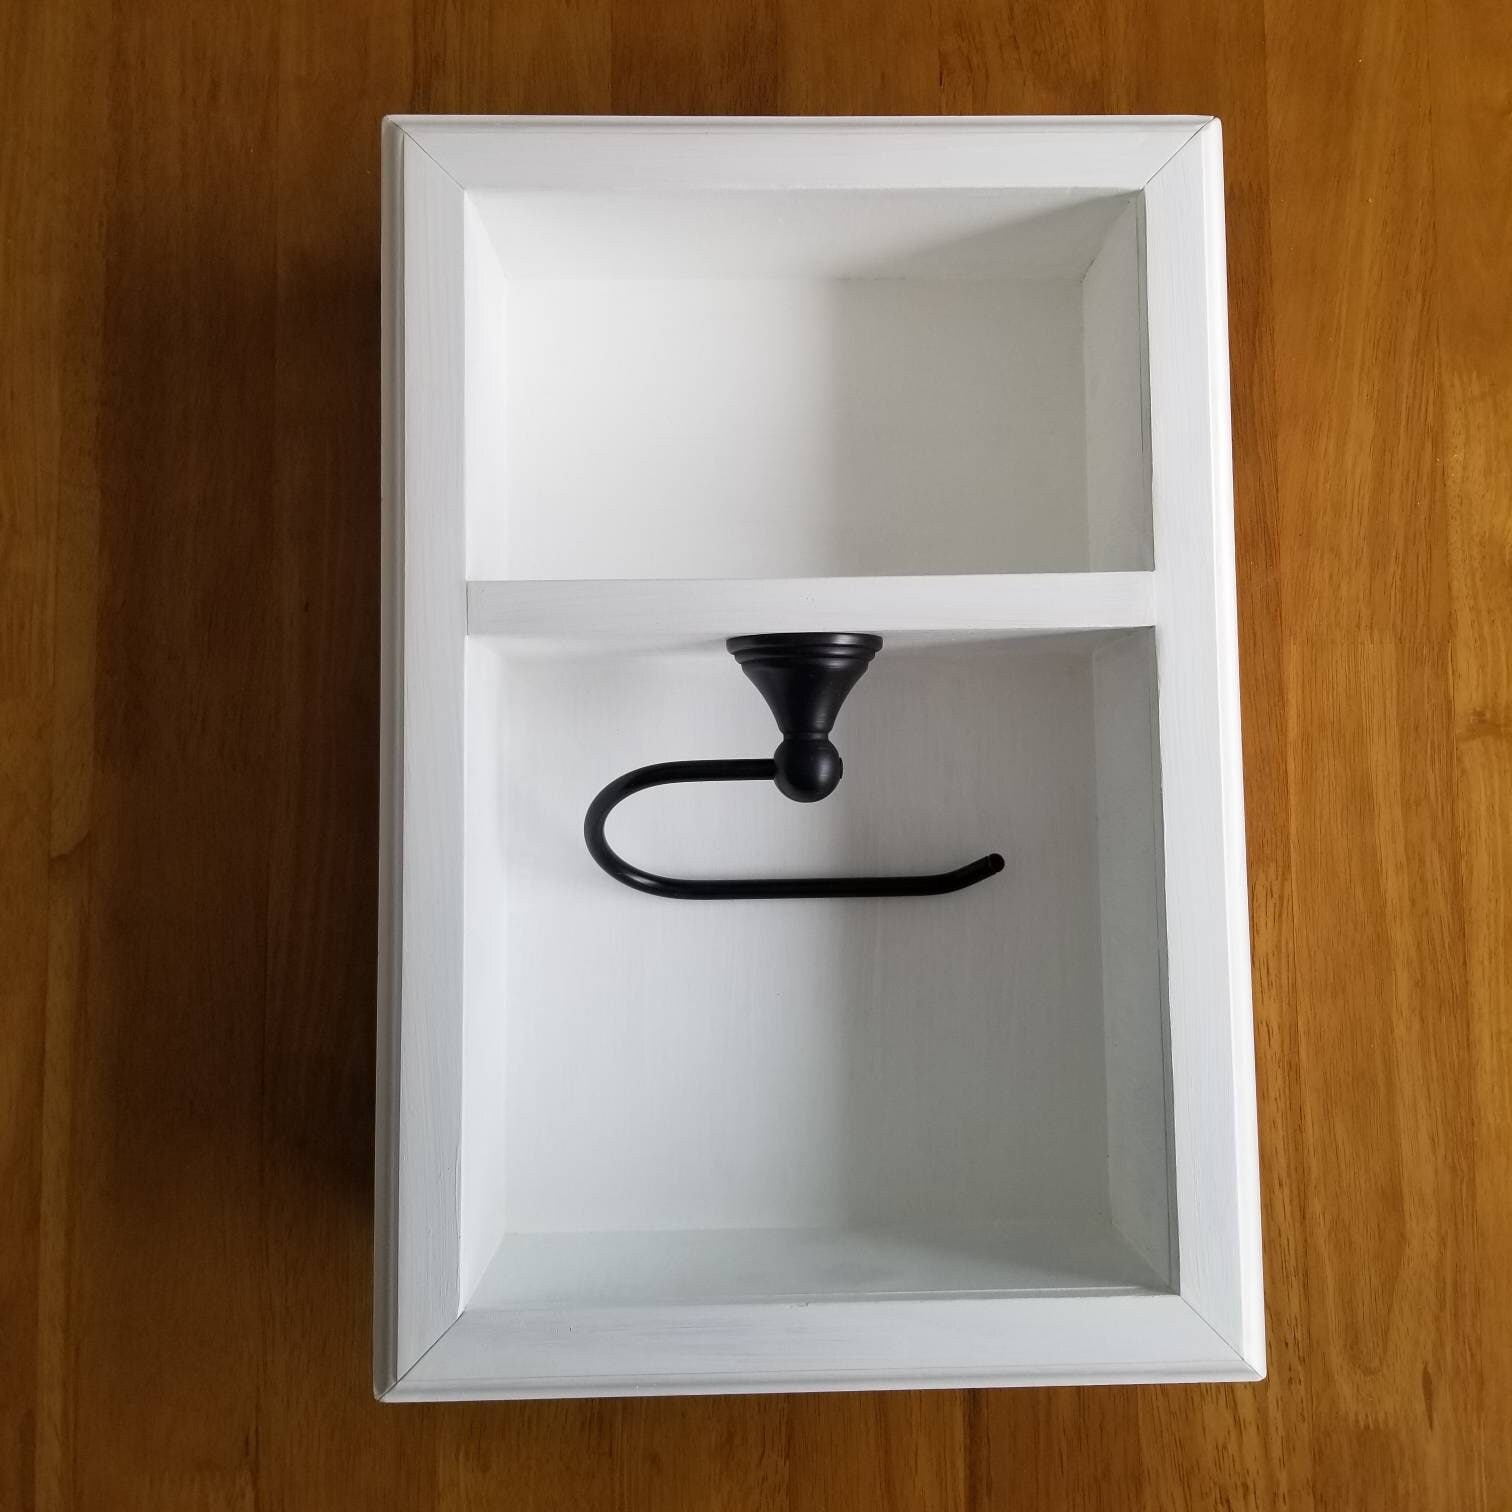 Buy Wholesale China Toilet Paper Holder Stand With Shelf, Free